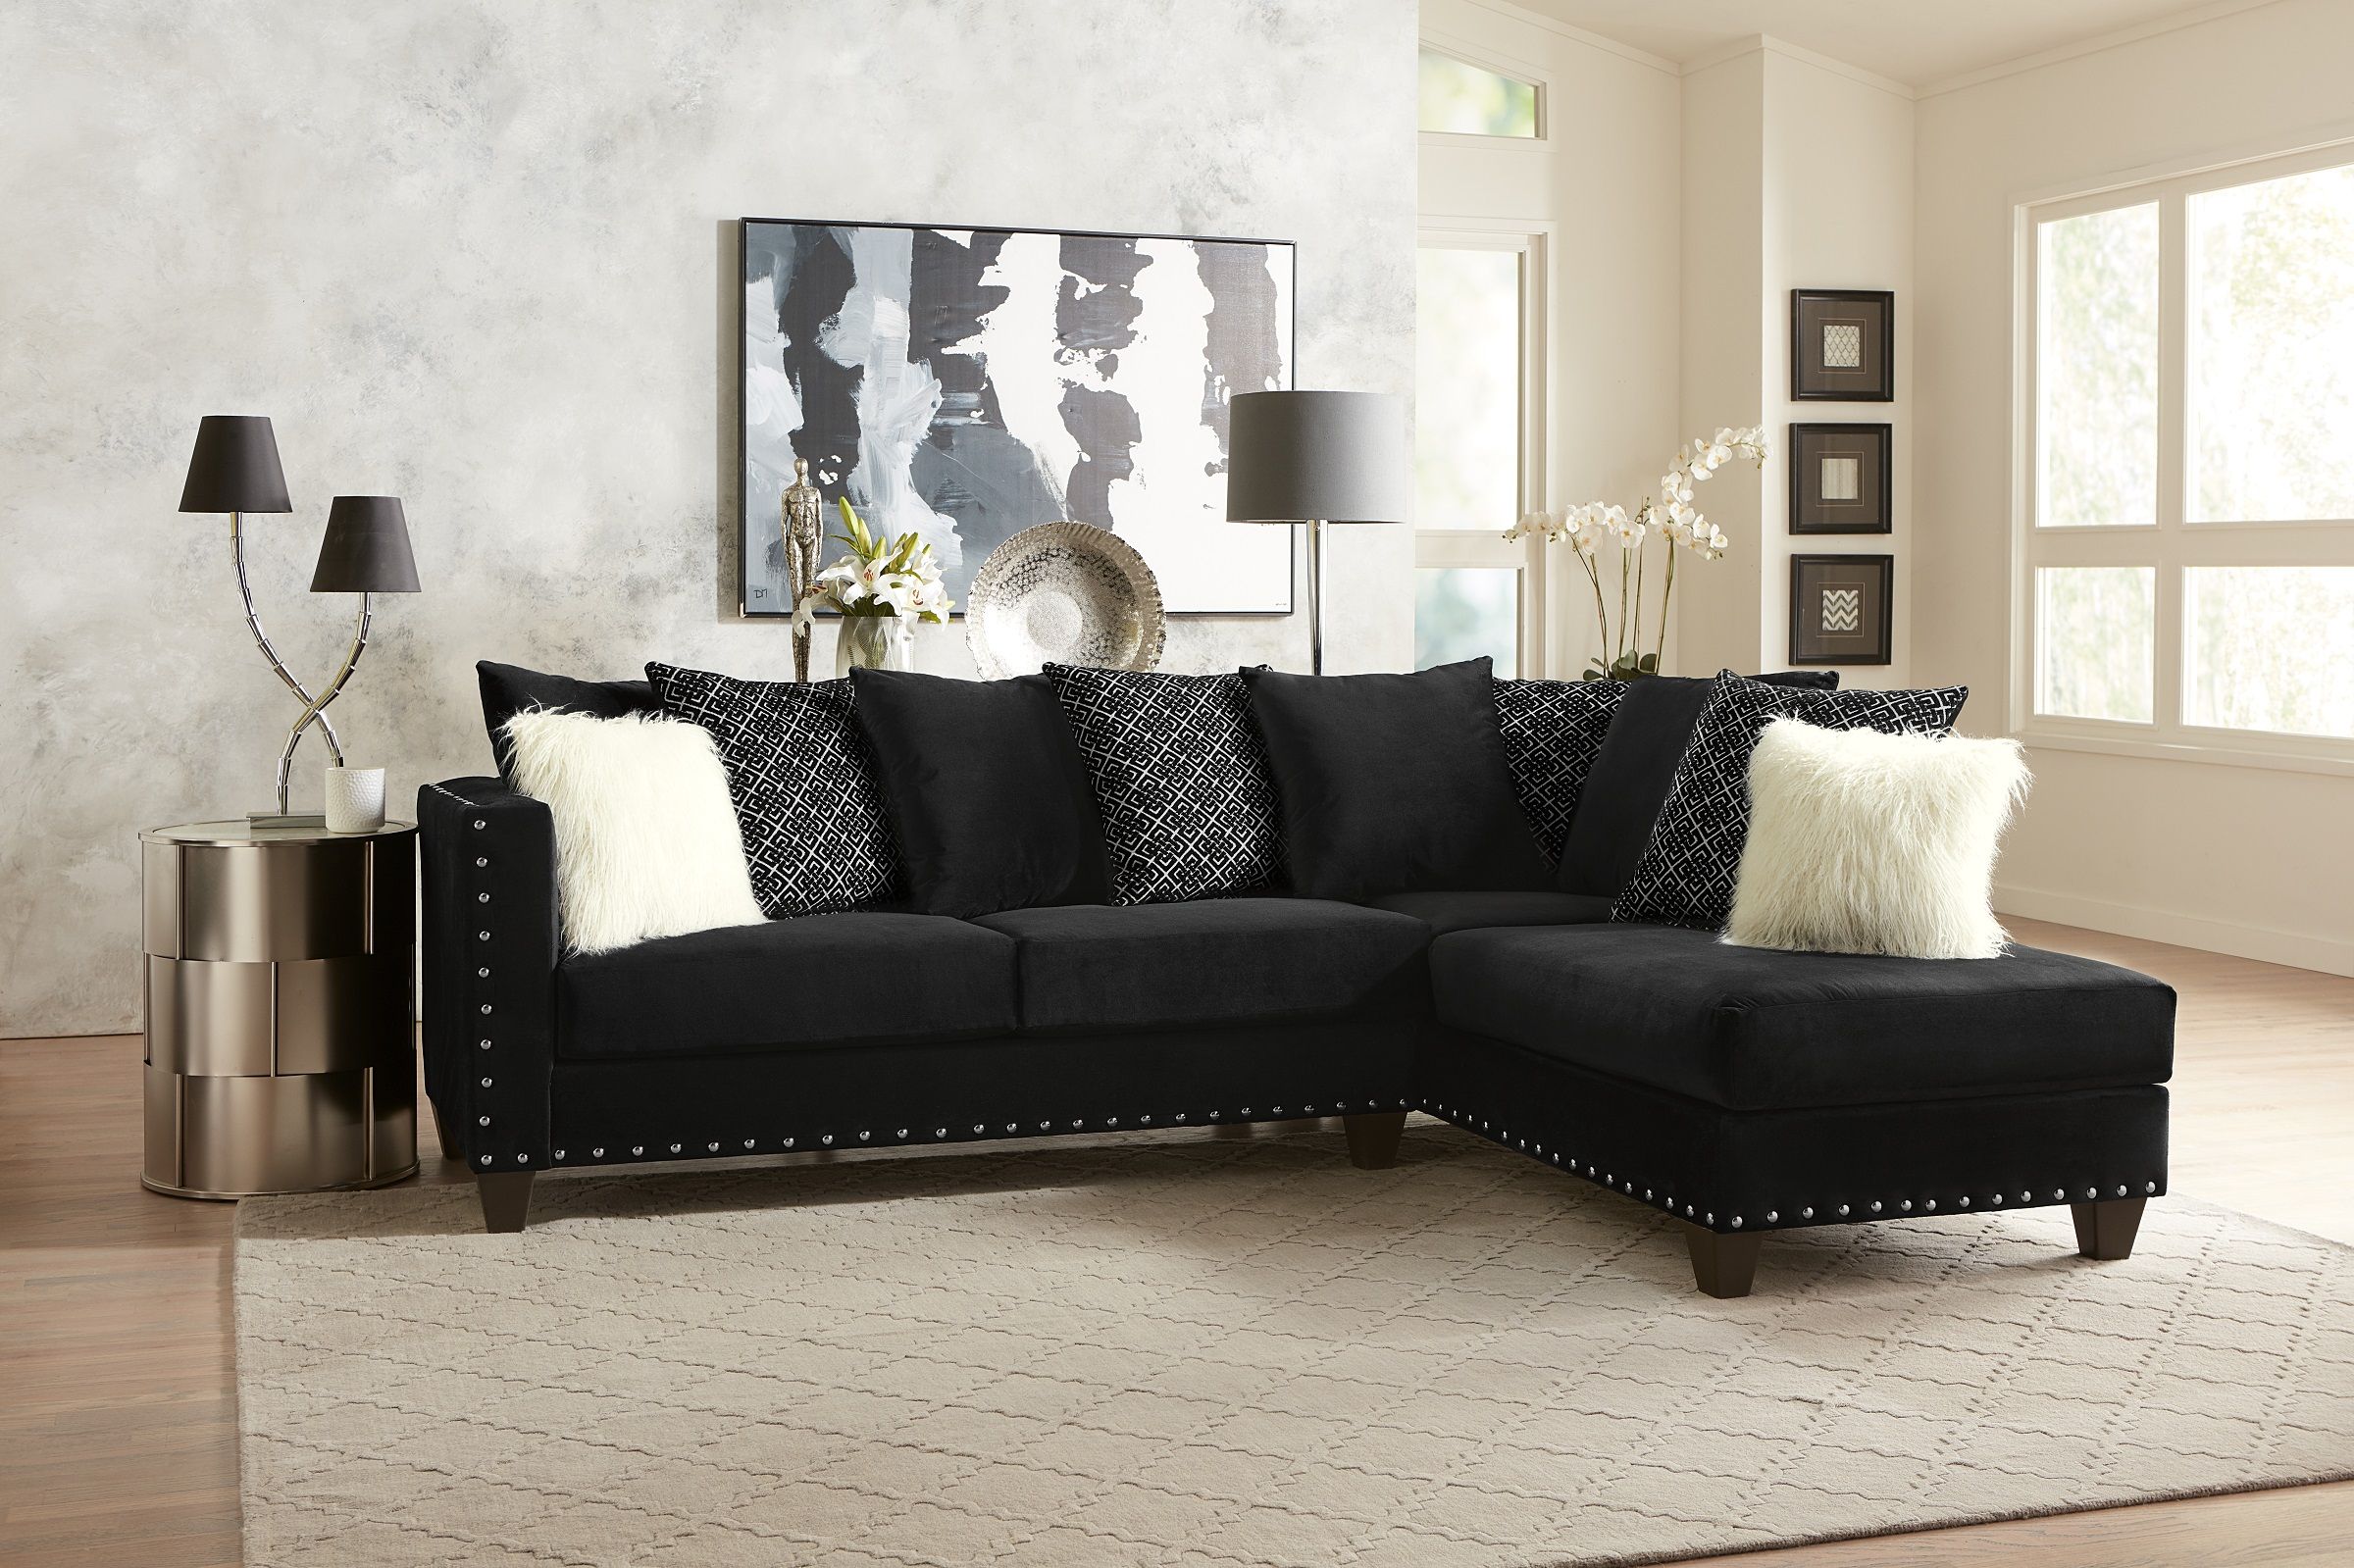 Living Room Modern Classic Black Fabric Sectional Sofa 2pc Pertaining To 4pc Crowningshield Contemporary Chaise Sectional Sofas (View 11 of 15)